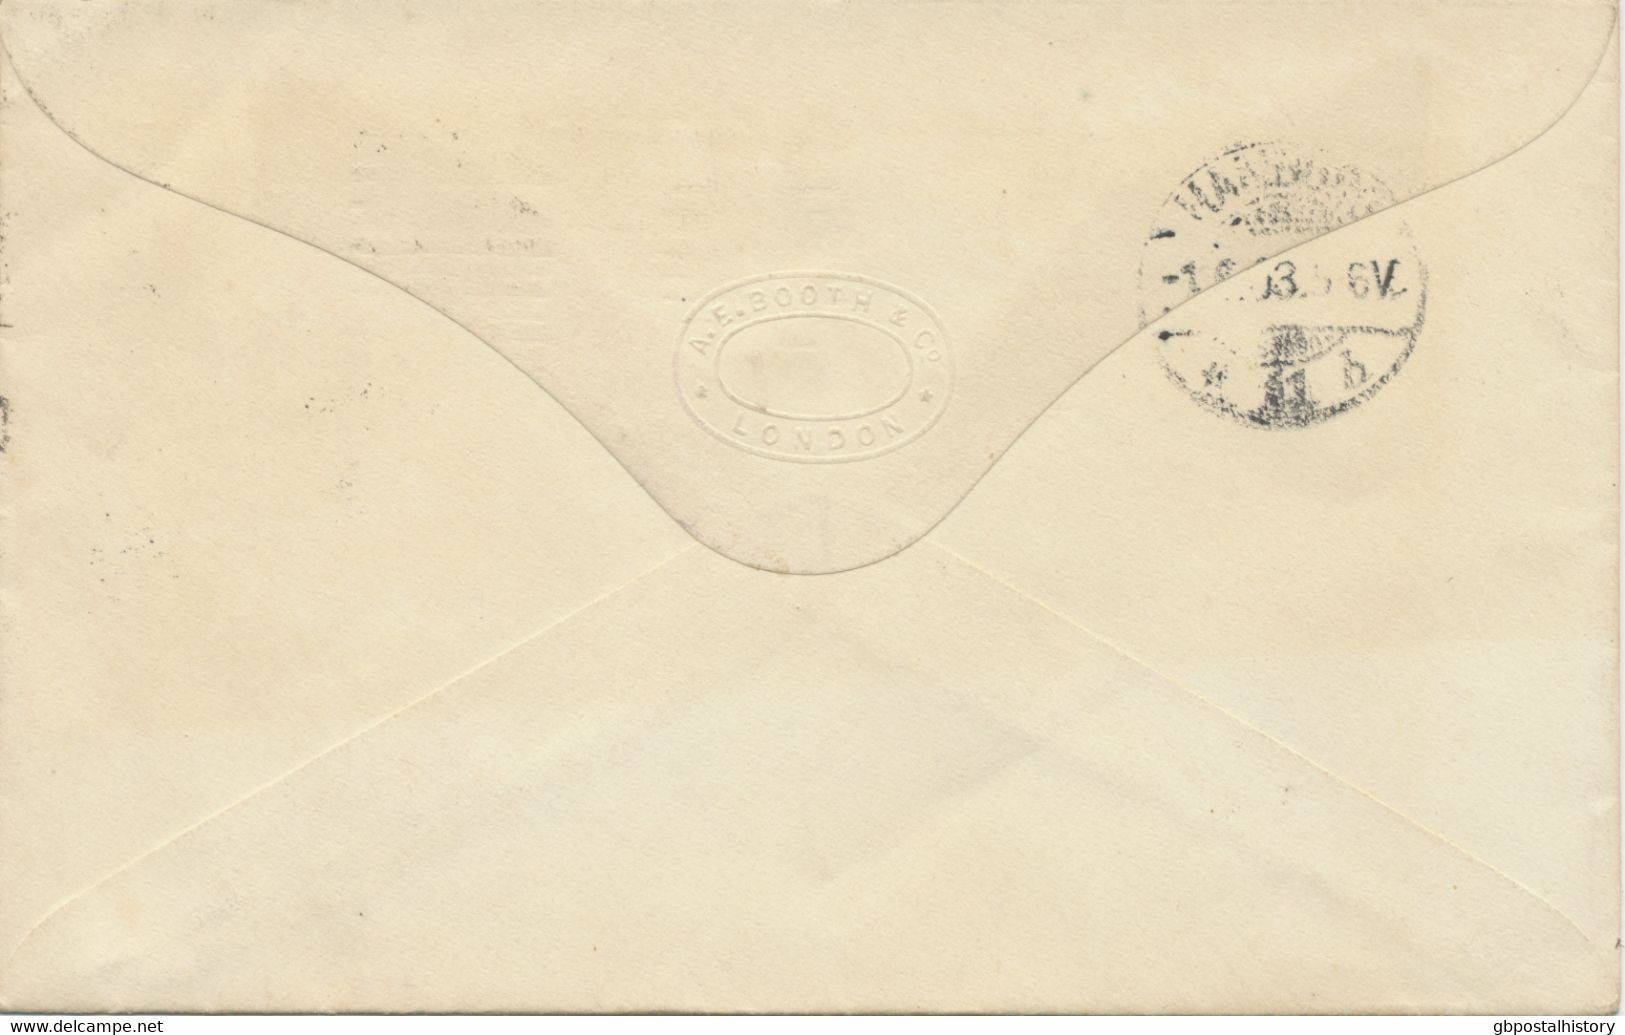 GB 1903, Superb EVII 1d Red Stamped To Order Postal Stationery Envelope (A.E. Booth & Co., London) Uprated With 1 ½d - Lettres & Documents